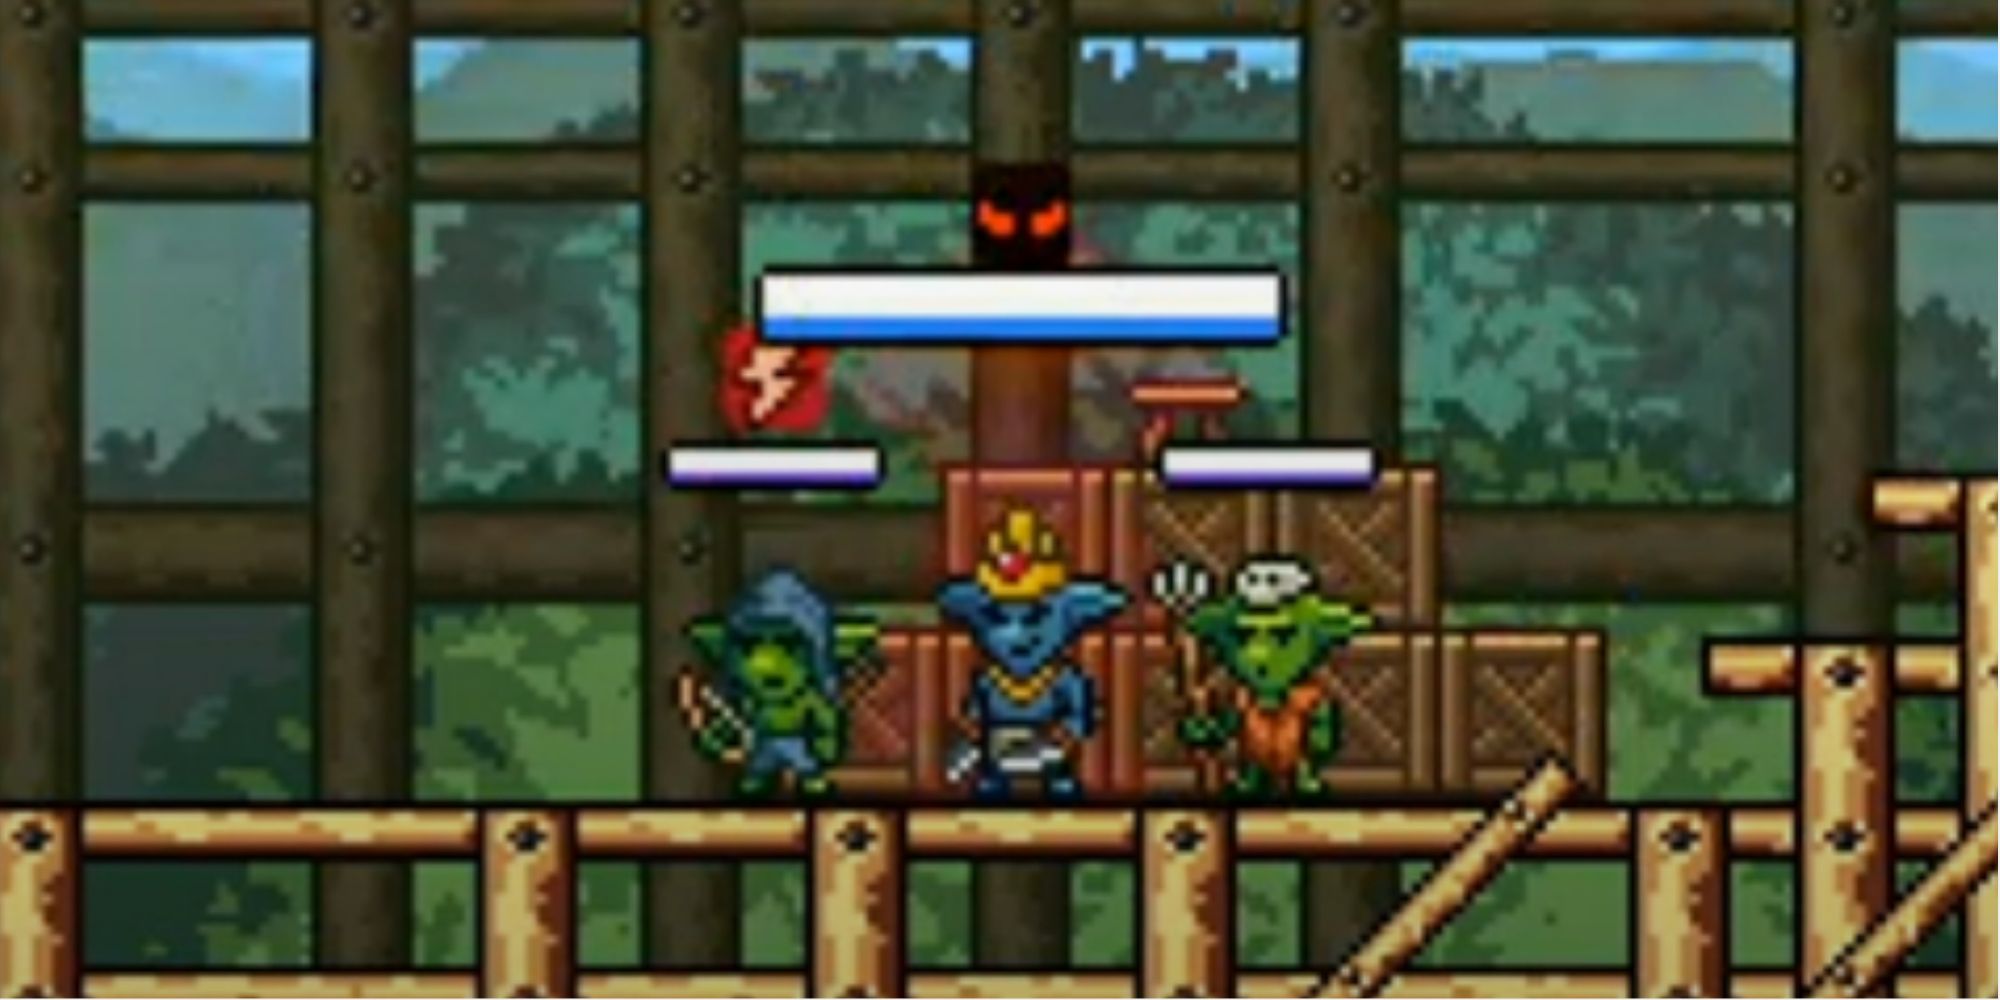 goblin king battle with his minions in monster sanctuary